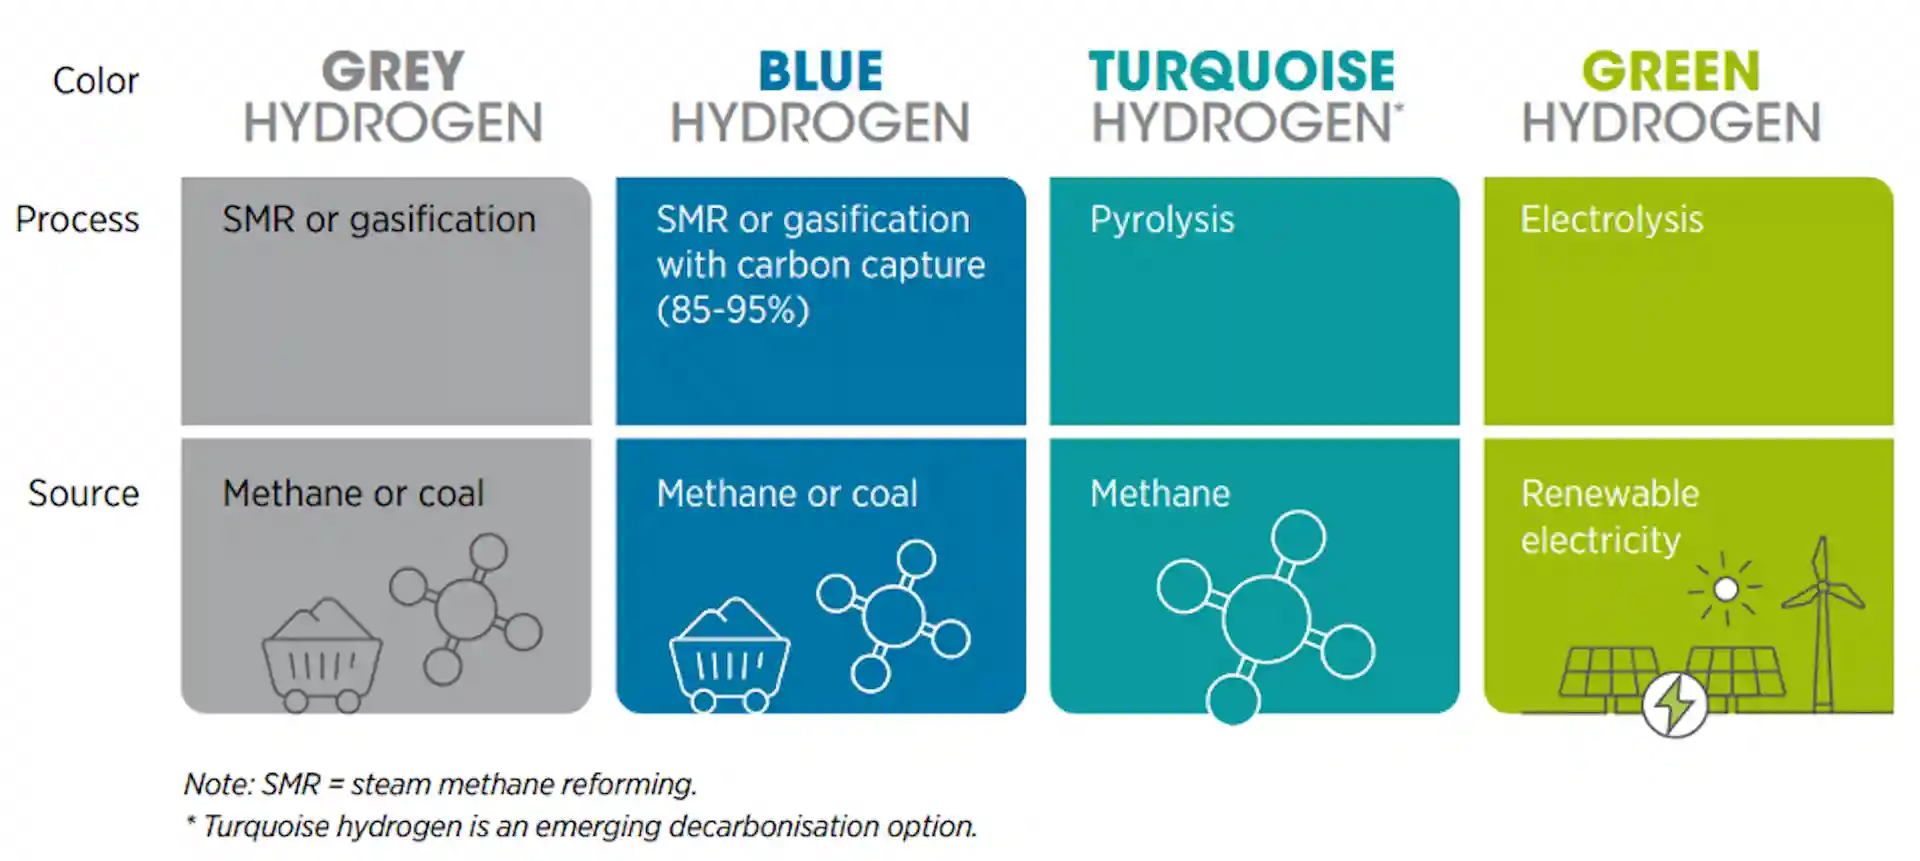 Chart showing different colors of hydrogen and how each is made